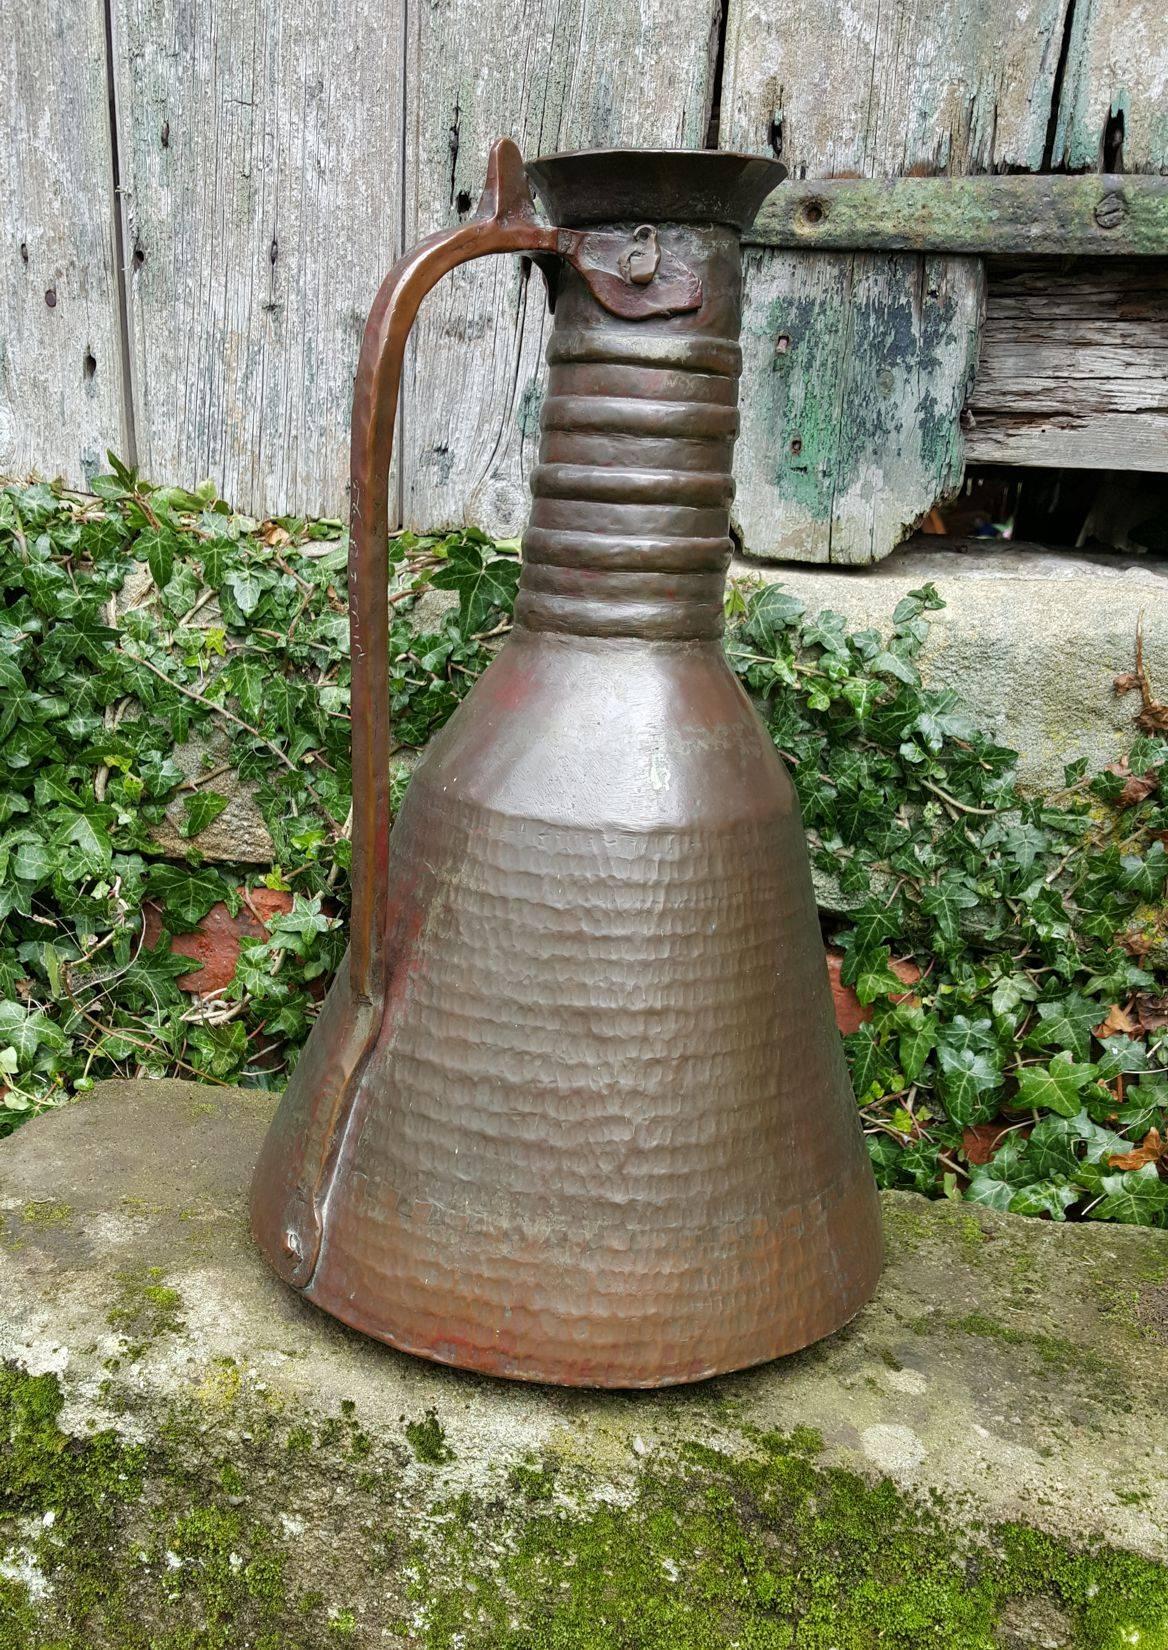 A very sculptural and tactile Turkish copper water jug of some age with a lovely patina. Beautifully hand beaten copper with domed base tapering to a narrow neck with hand formed rings and scalloped rim. Handle is riveted to the body, there is a